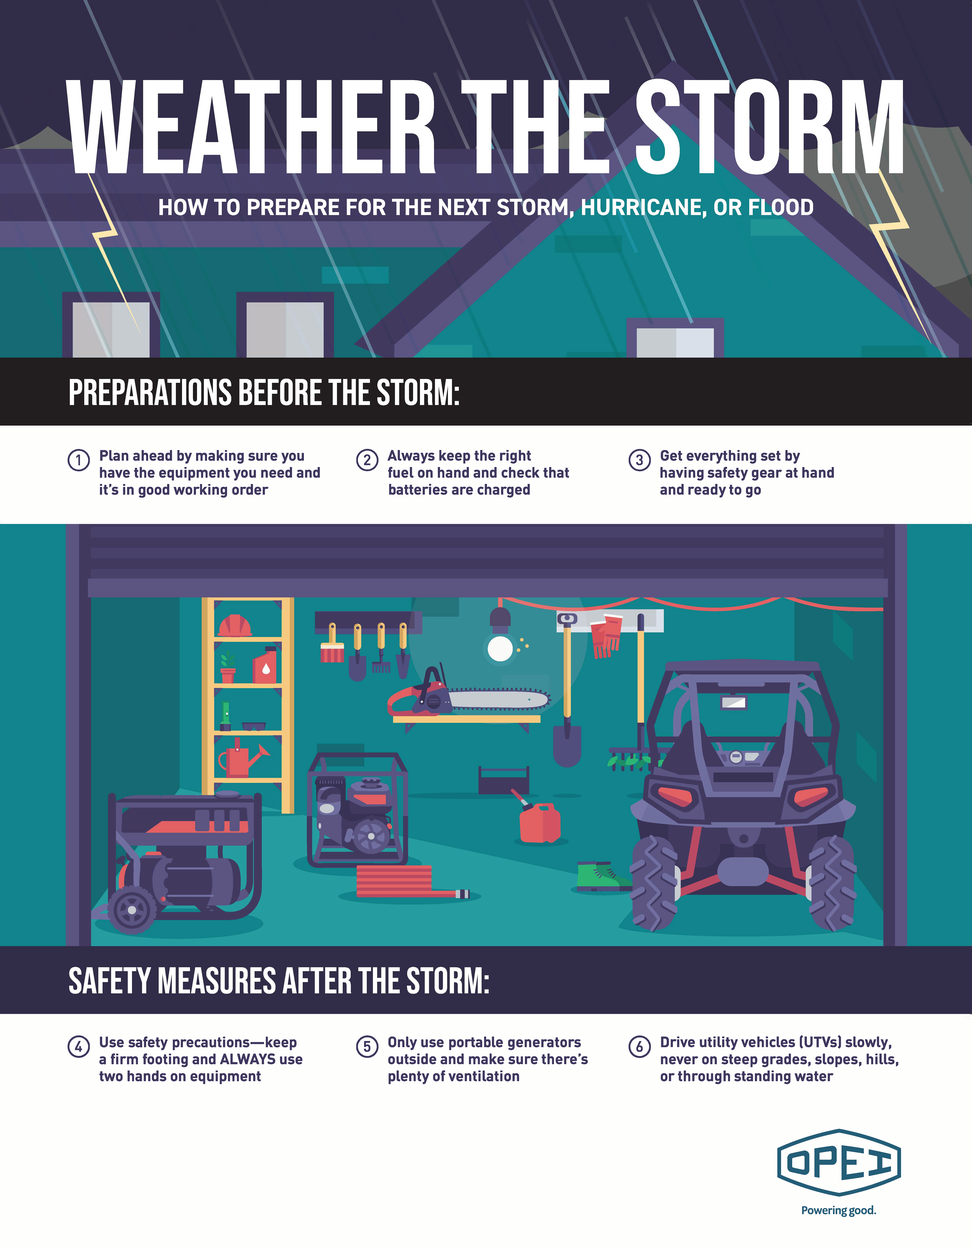 https://d9t0rxvvdasmy.cloudfront.net/media/images/18-70644-OPEI_Infographic_Storm_Preparednes.max-972x2000.png